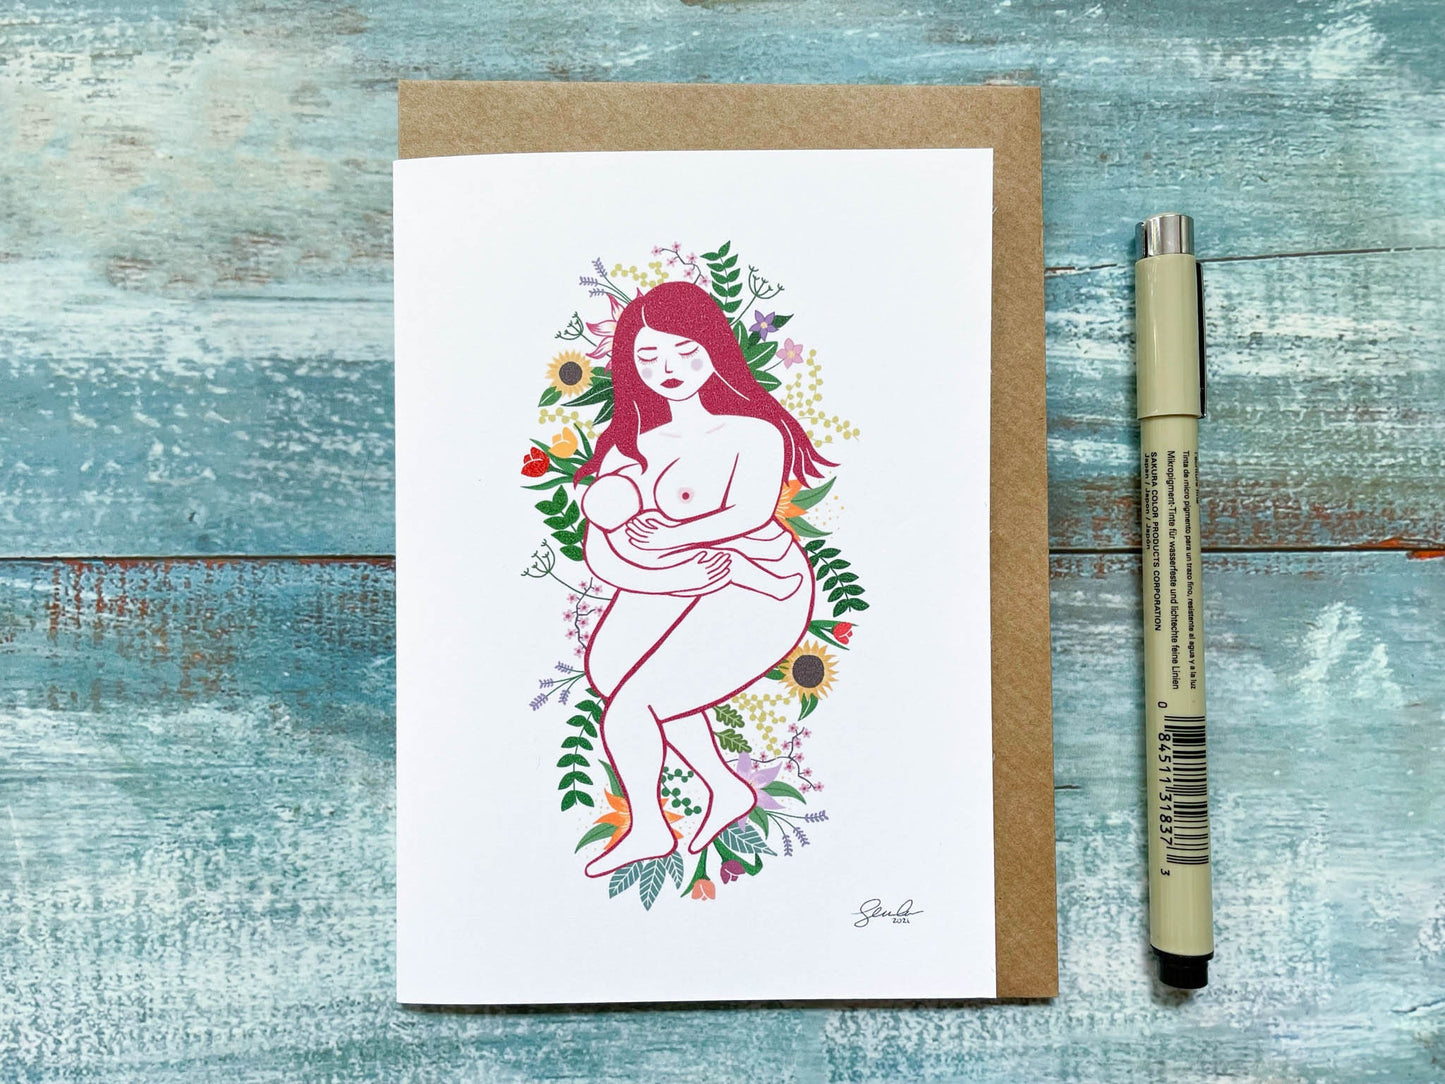 An A6 card of an illustration of a breastfeeding mother laying on a bed of flowers and leaves